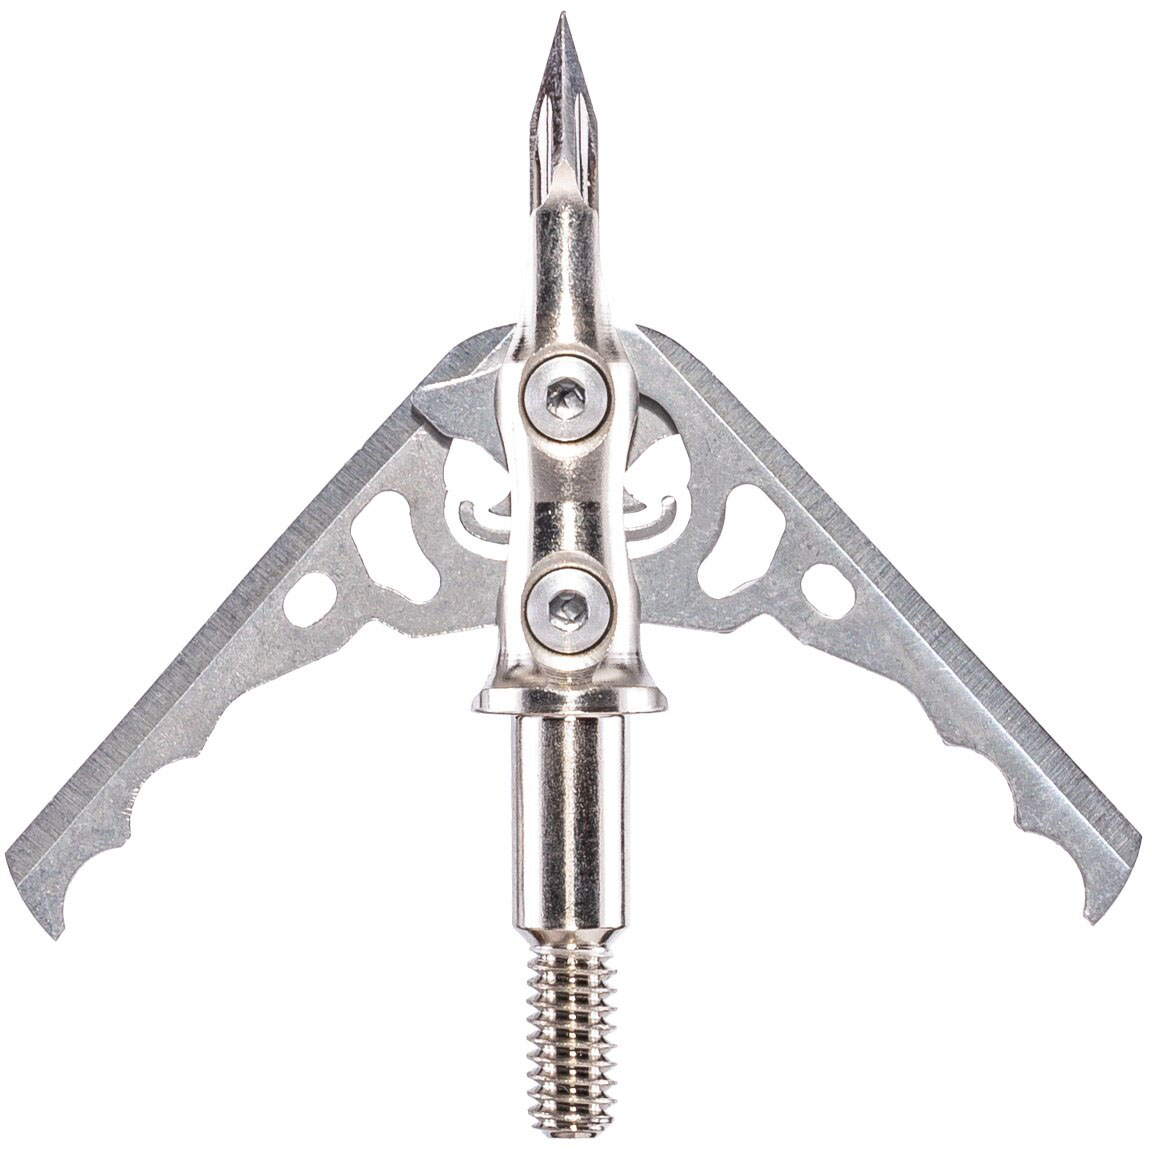 Rage Hypodermic NC Crossbows $5.00 Off w/ Free Shipping and Handling